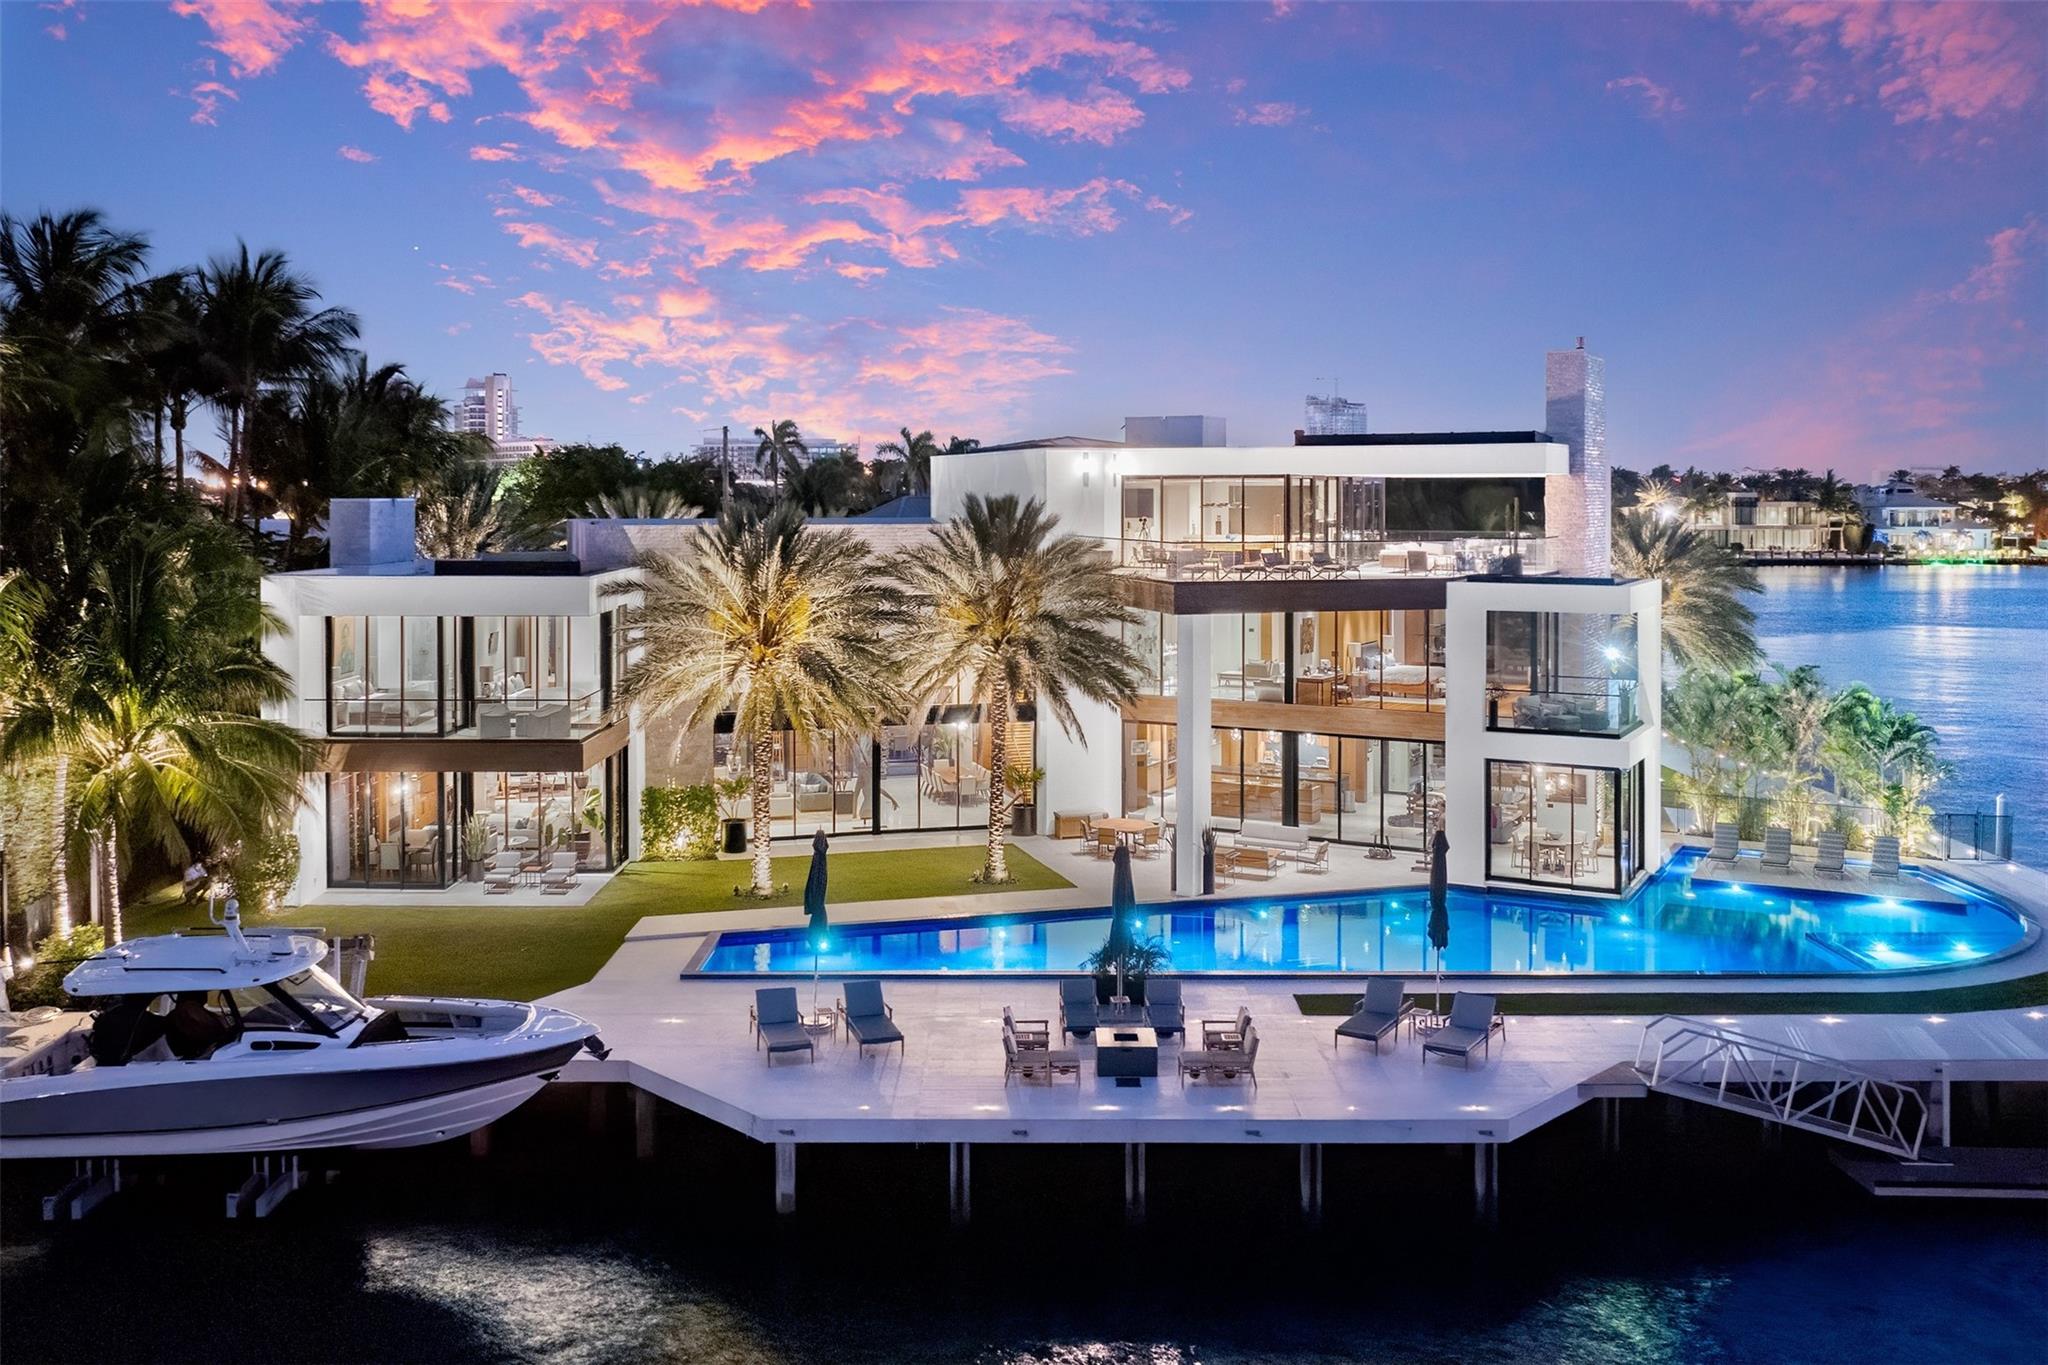 Epitome of ultra luxury living in prestigious Harbor Beach. With Intracoastal views & 298’ WF, this point lot estate offers a seamless blend of modern sophistication & timeless elegance. Find unparalleled lifestyle within w/ impeccable attention to detail & the highest quality finishes throughout. Spanned across 3 floors, find luxury at every turn w/ marble & wood floors, state of the art security system, smart home capabilities & expansive third floor lounge w/the best views in the City. Voluminous ceilings, commercial grade elevator, 4 fireplaces, 6 wet bars & an astounding +/- 90’ lap pool are just some of the amenities. Lounge by the infinity-edge pool, soak in the sun on the terrace, embark on a sunset cruise from your private dock. Neighborhood has Private Community owned Surf Club.